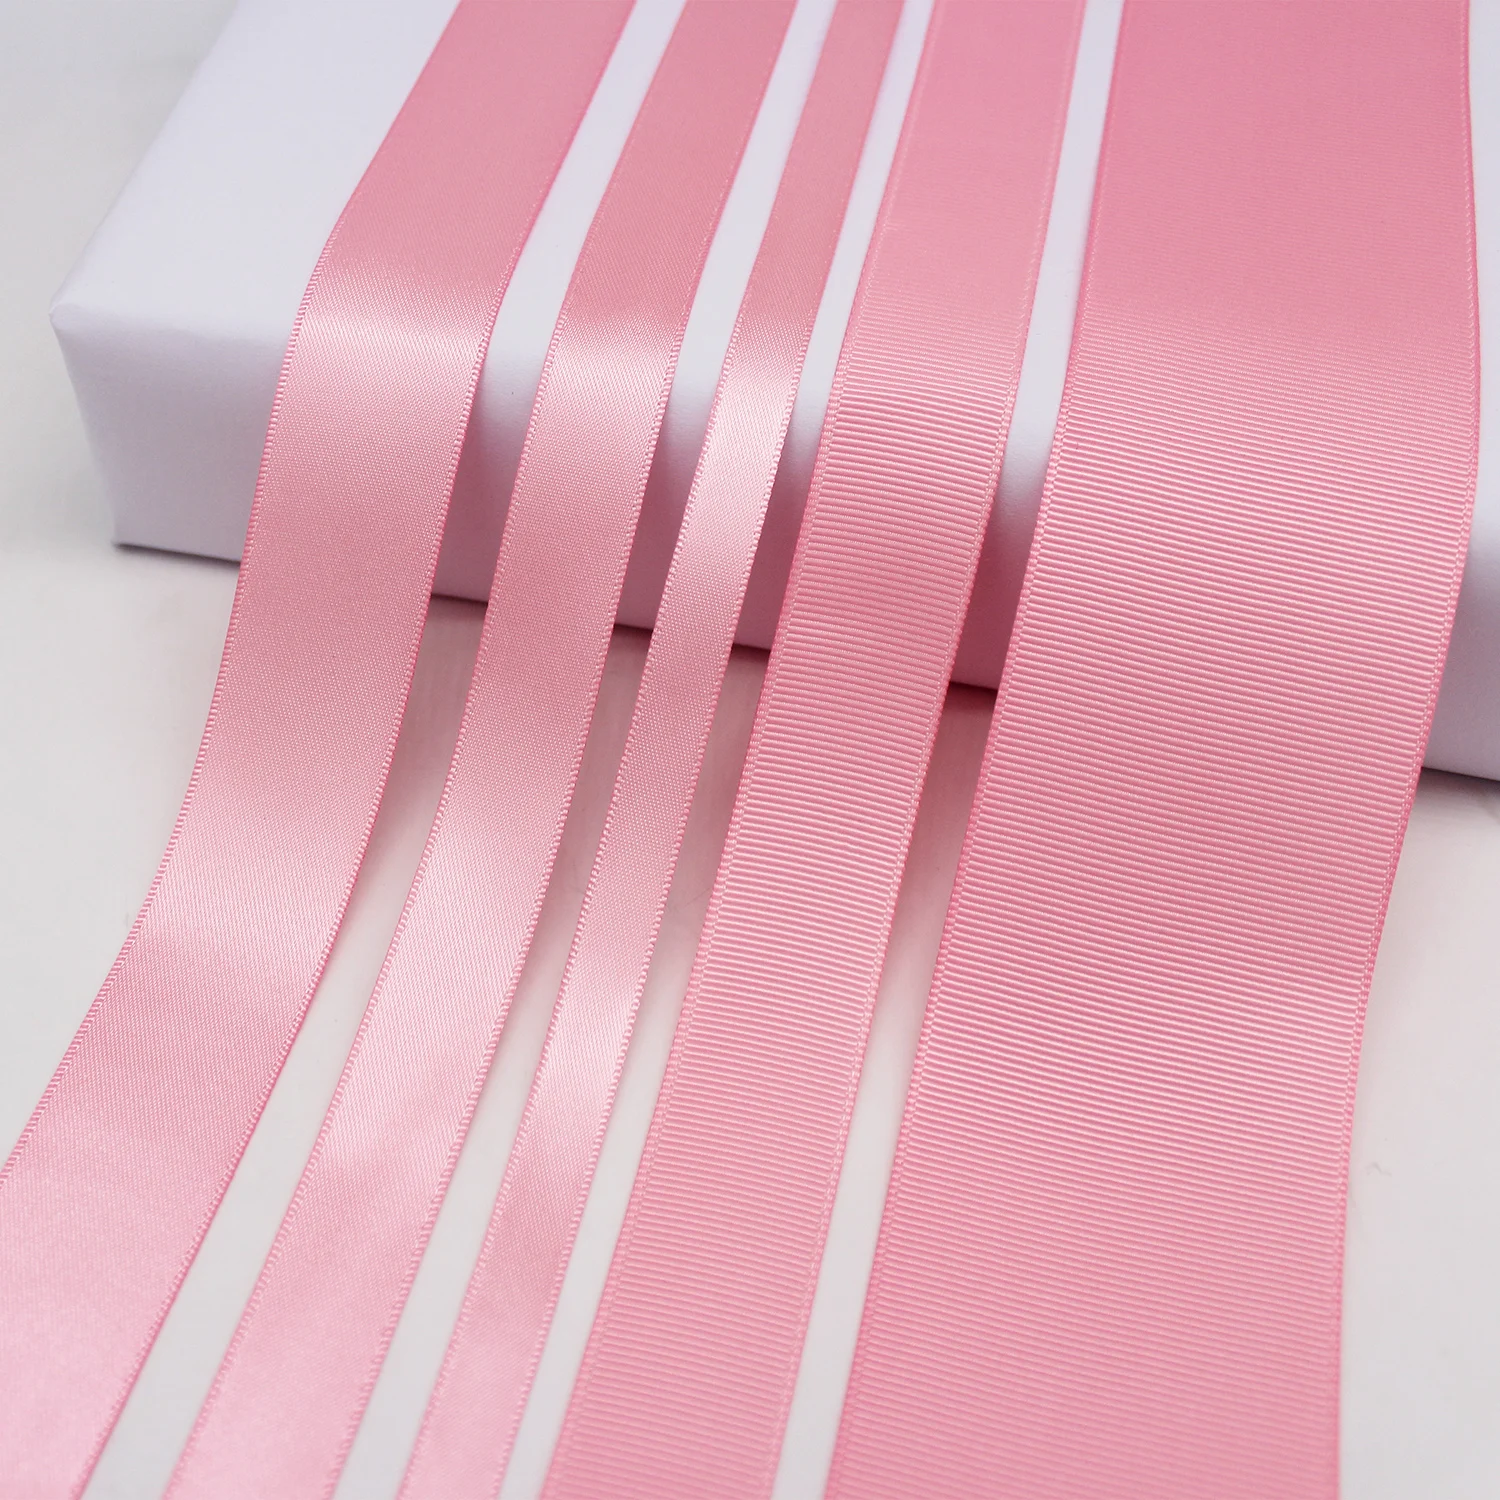 

5 Meter/Lot Pink Color Grosgrain Satin Ribbon For DIY Girls Hair Bows Accessories 6mm 9mm 13mm 16mm 19mm 22mm 25mm 38mm 50mm